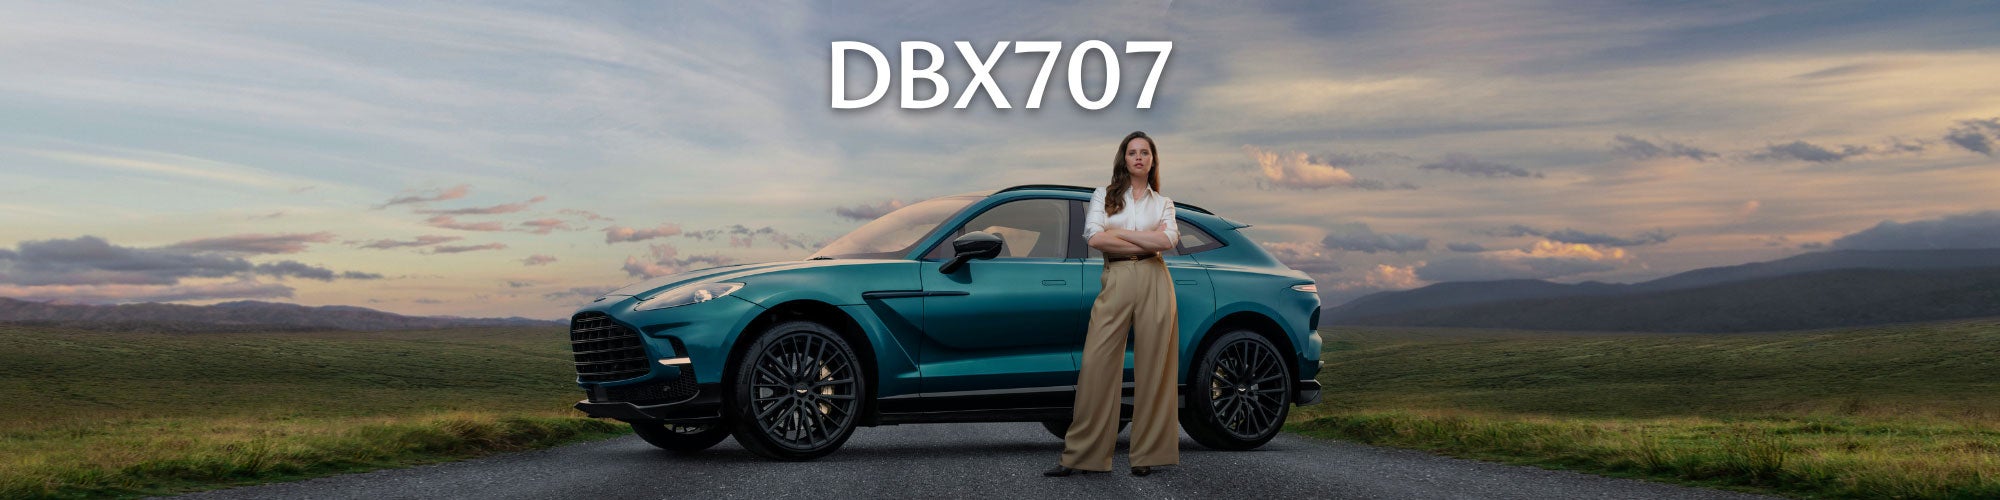 dbx707 inventory banner in the U.S.A.